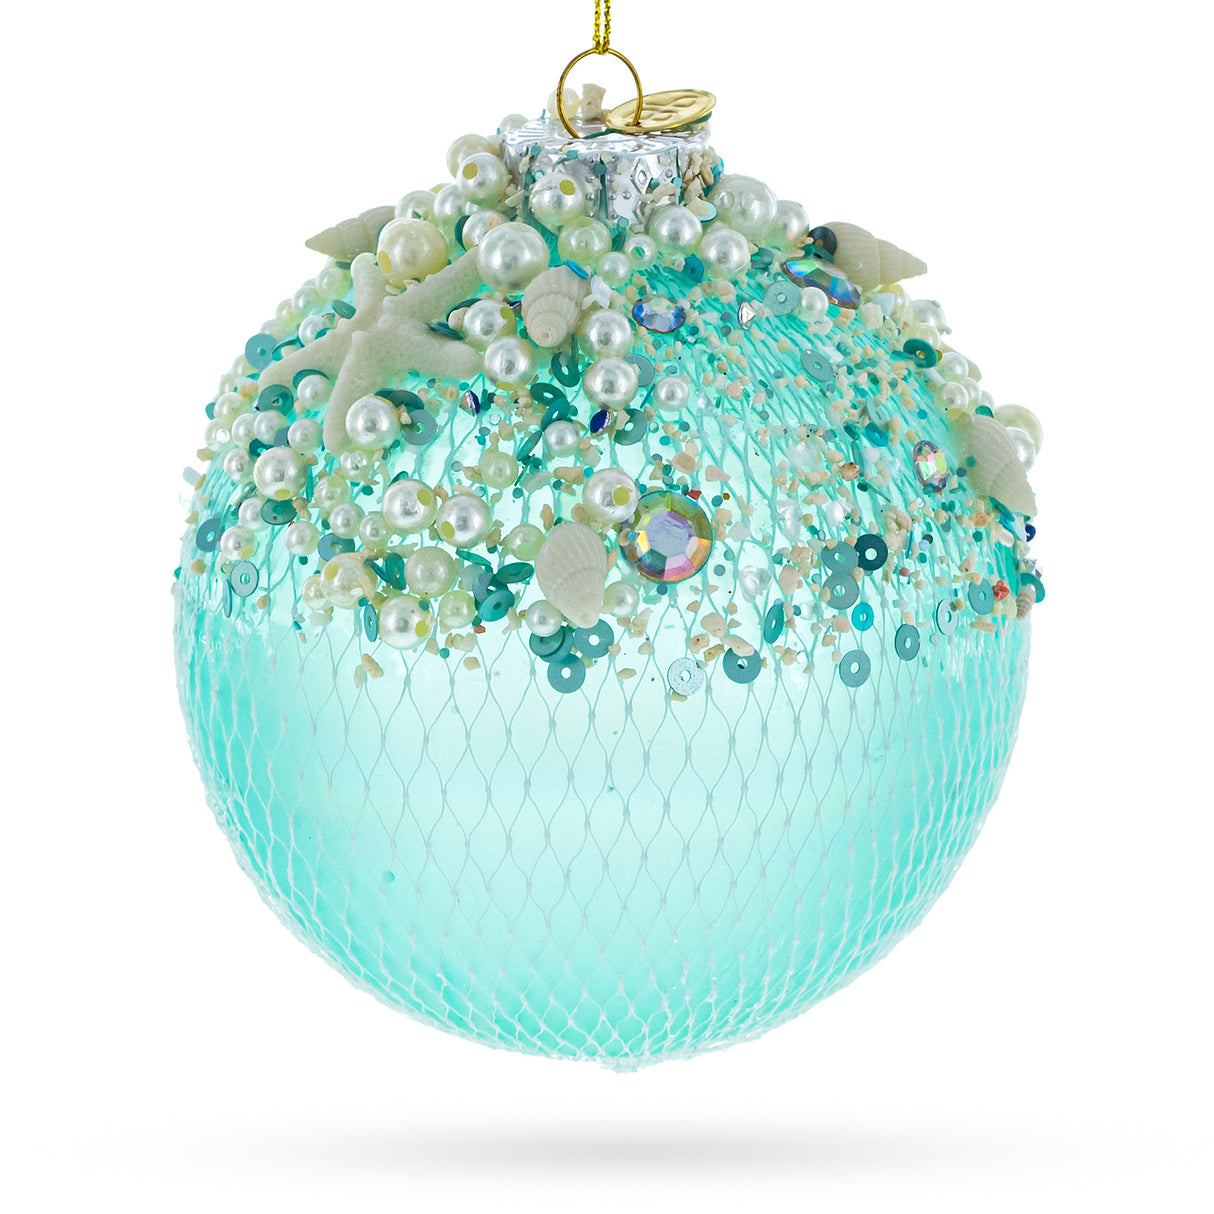 Nautical-Themed - Handcrafted Blown Glass Christmas Ornament in Blue color, Round shape